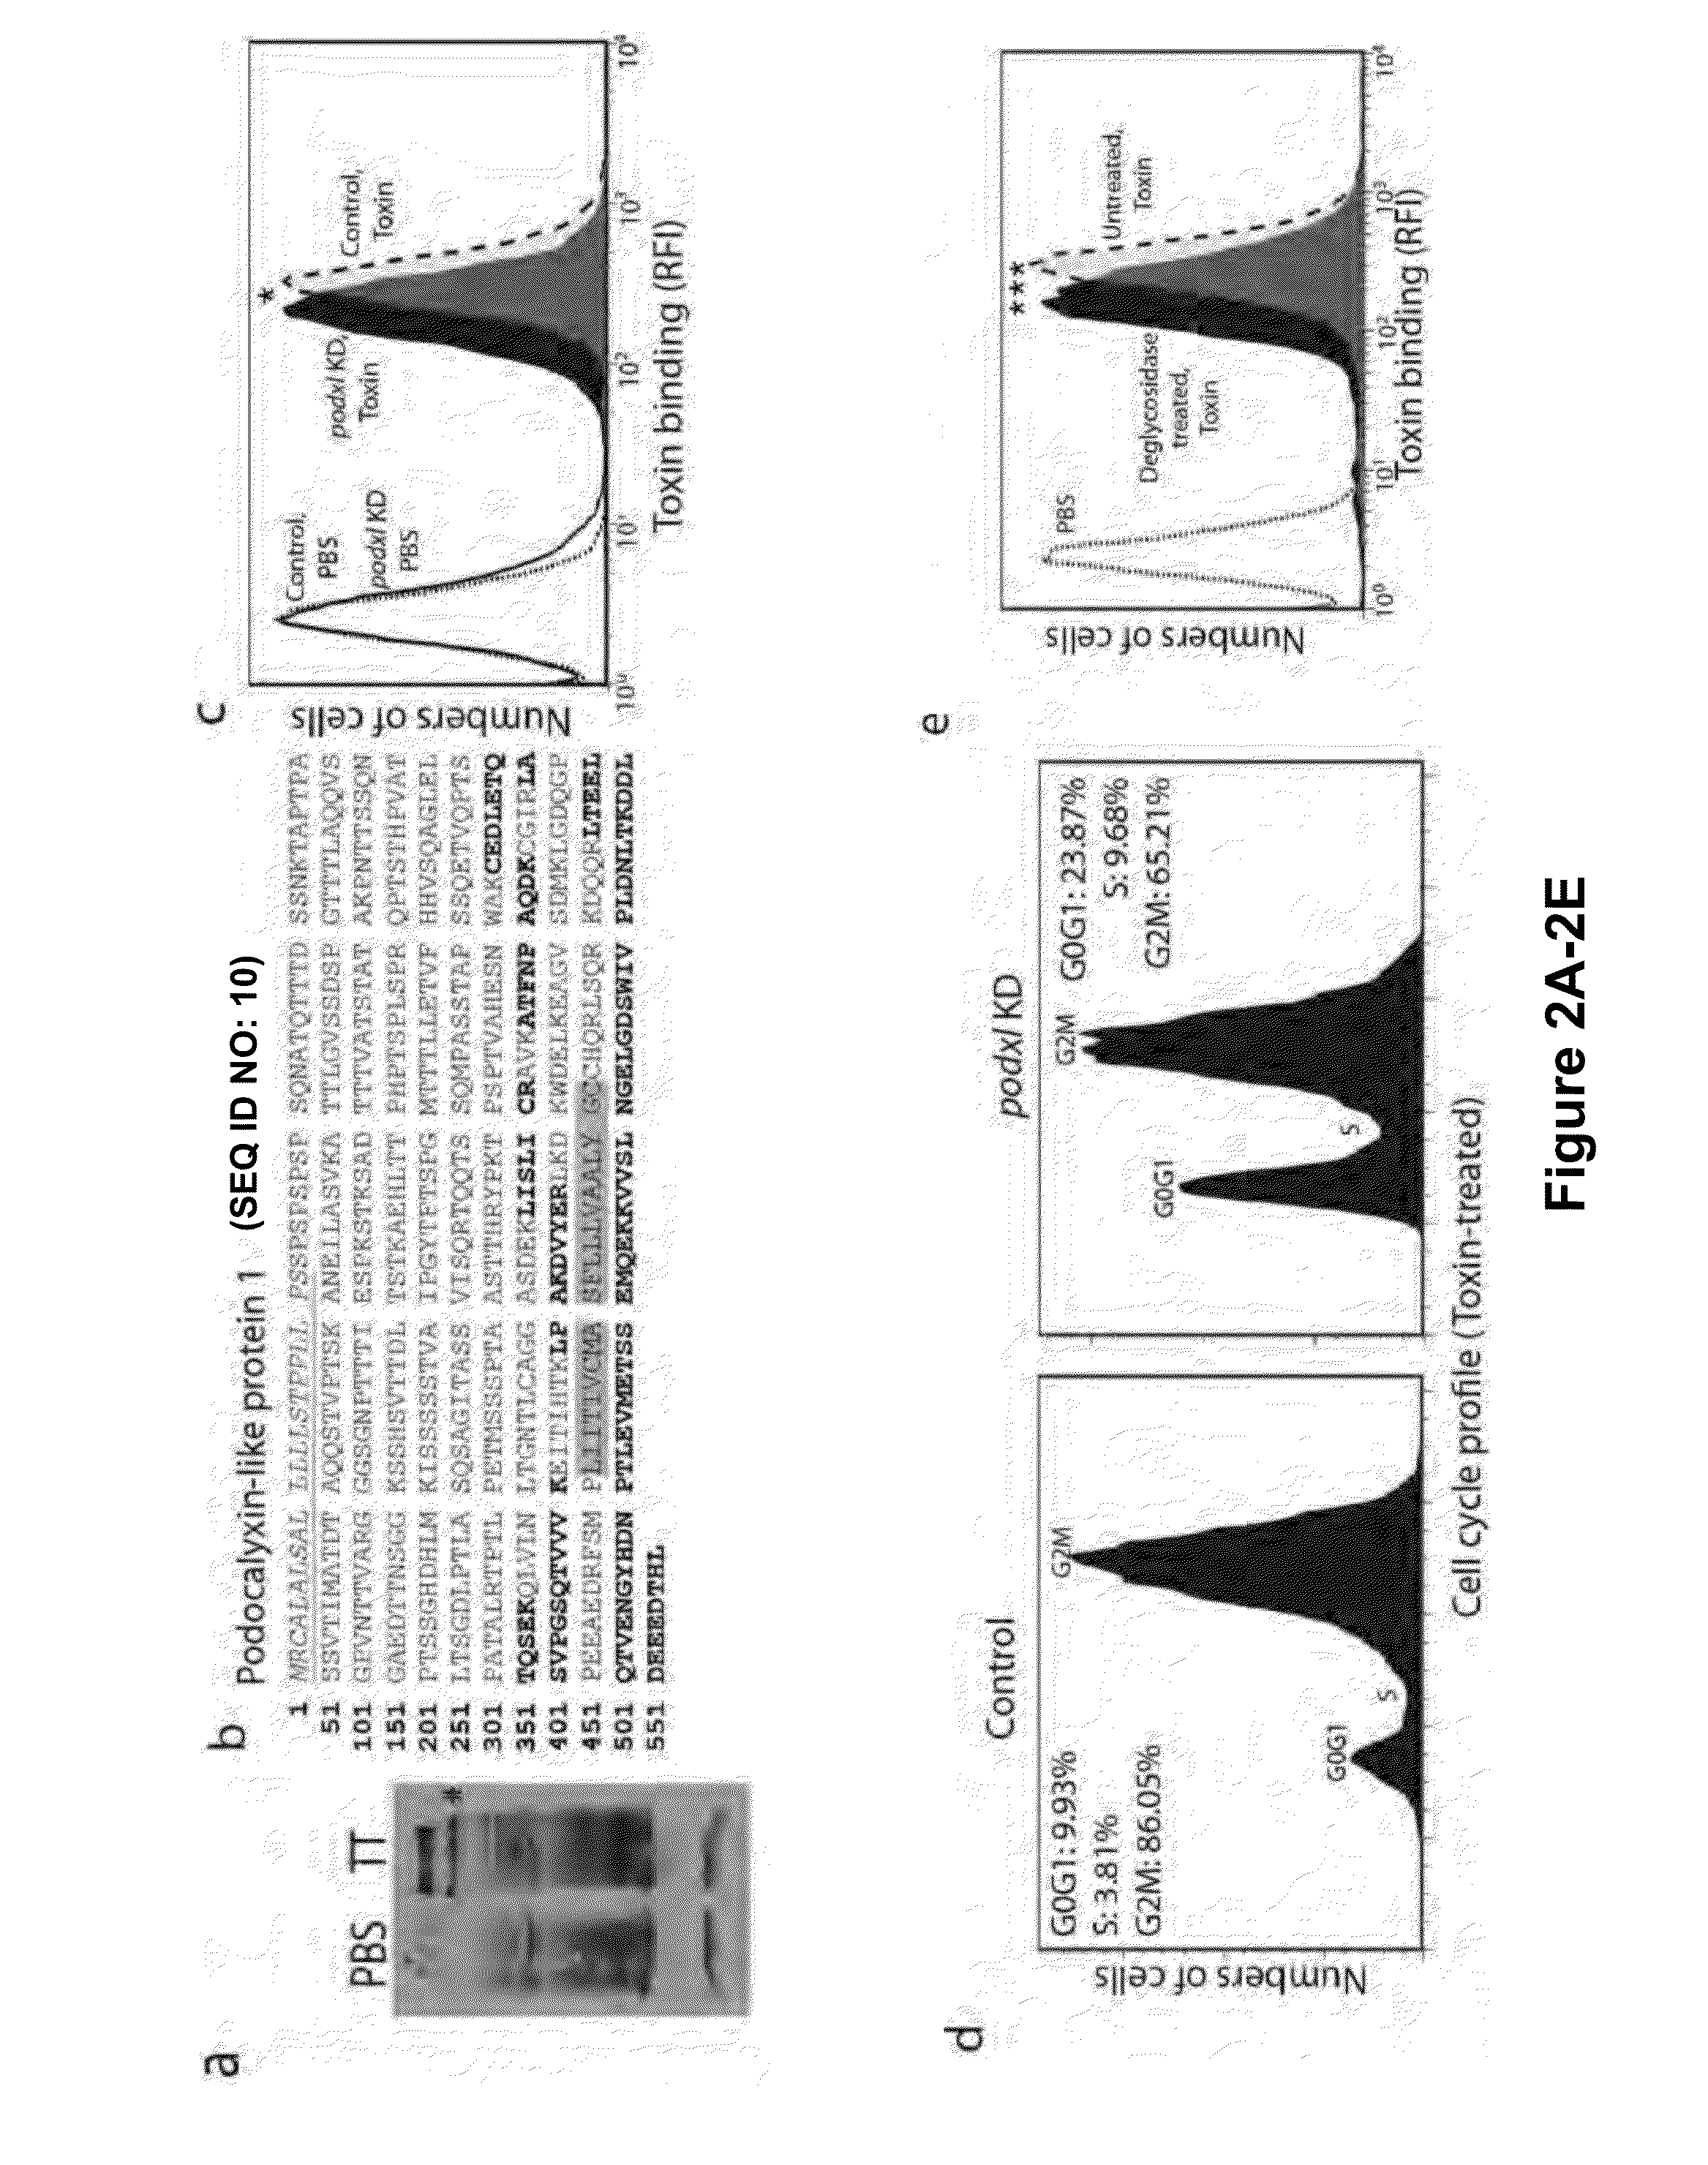 Compositions and Methods for Preventing and Treating Salmonella Typhi and Salmonella Paratyphi Infection